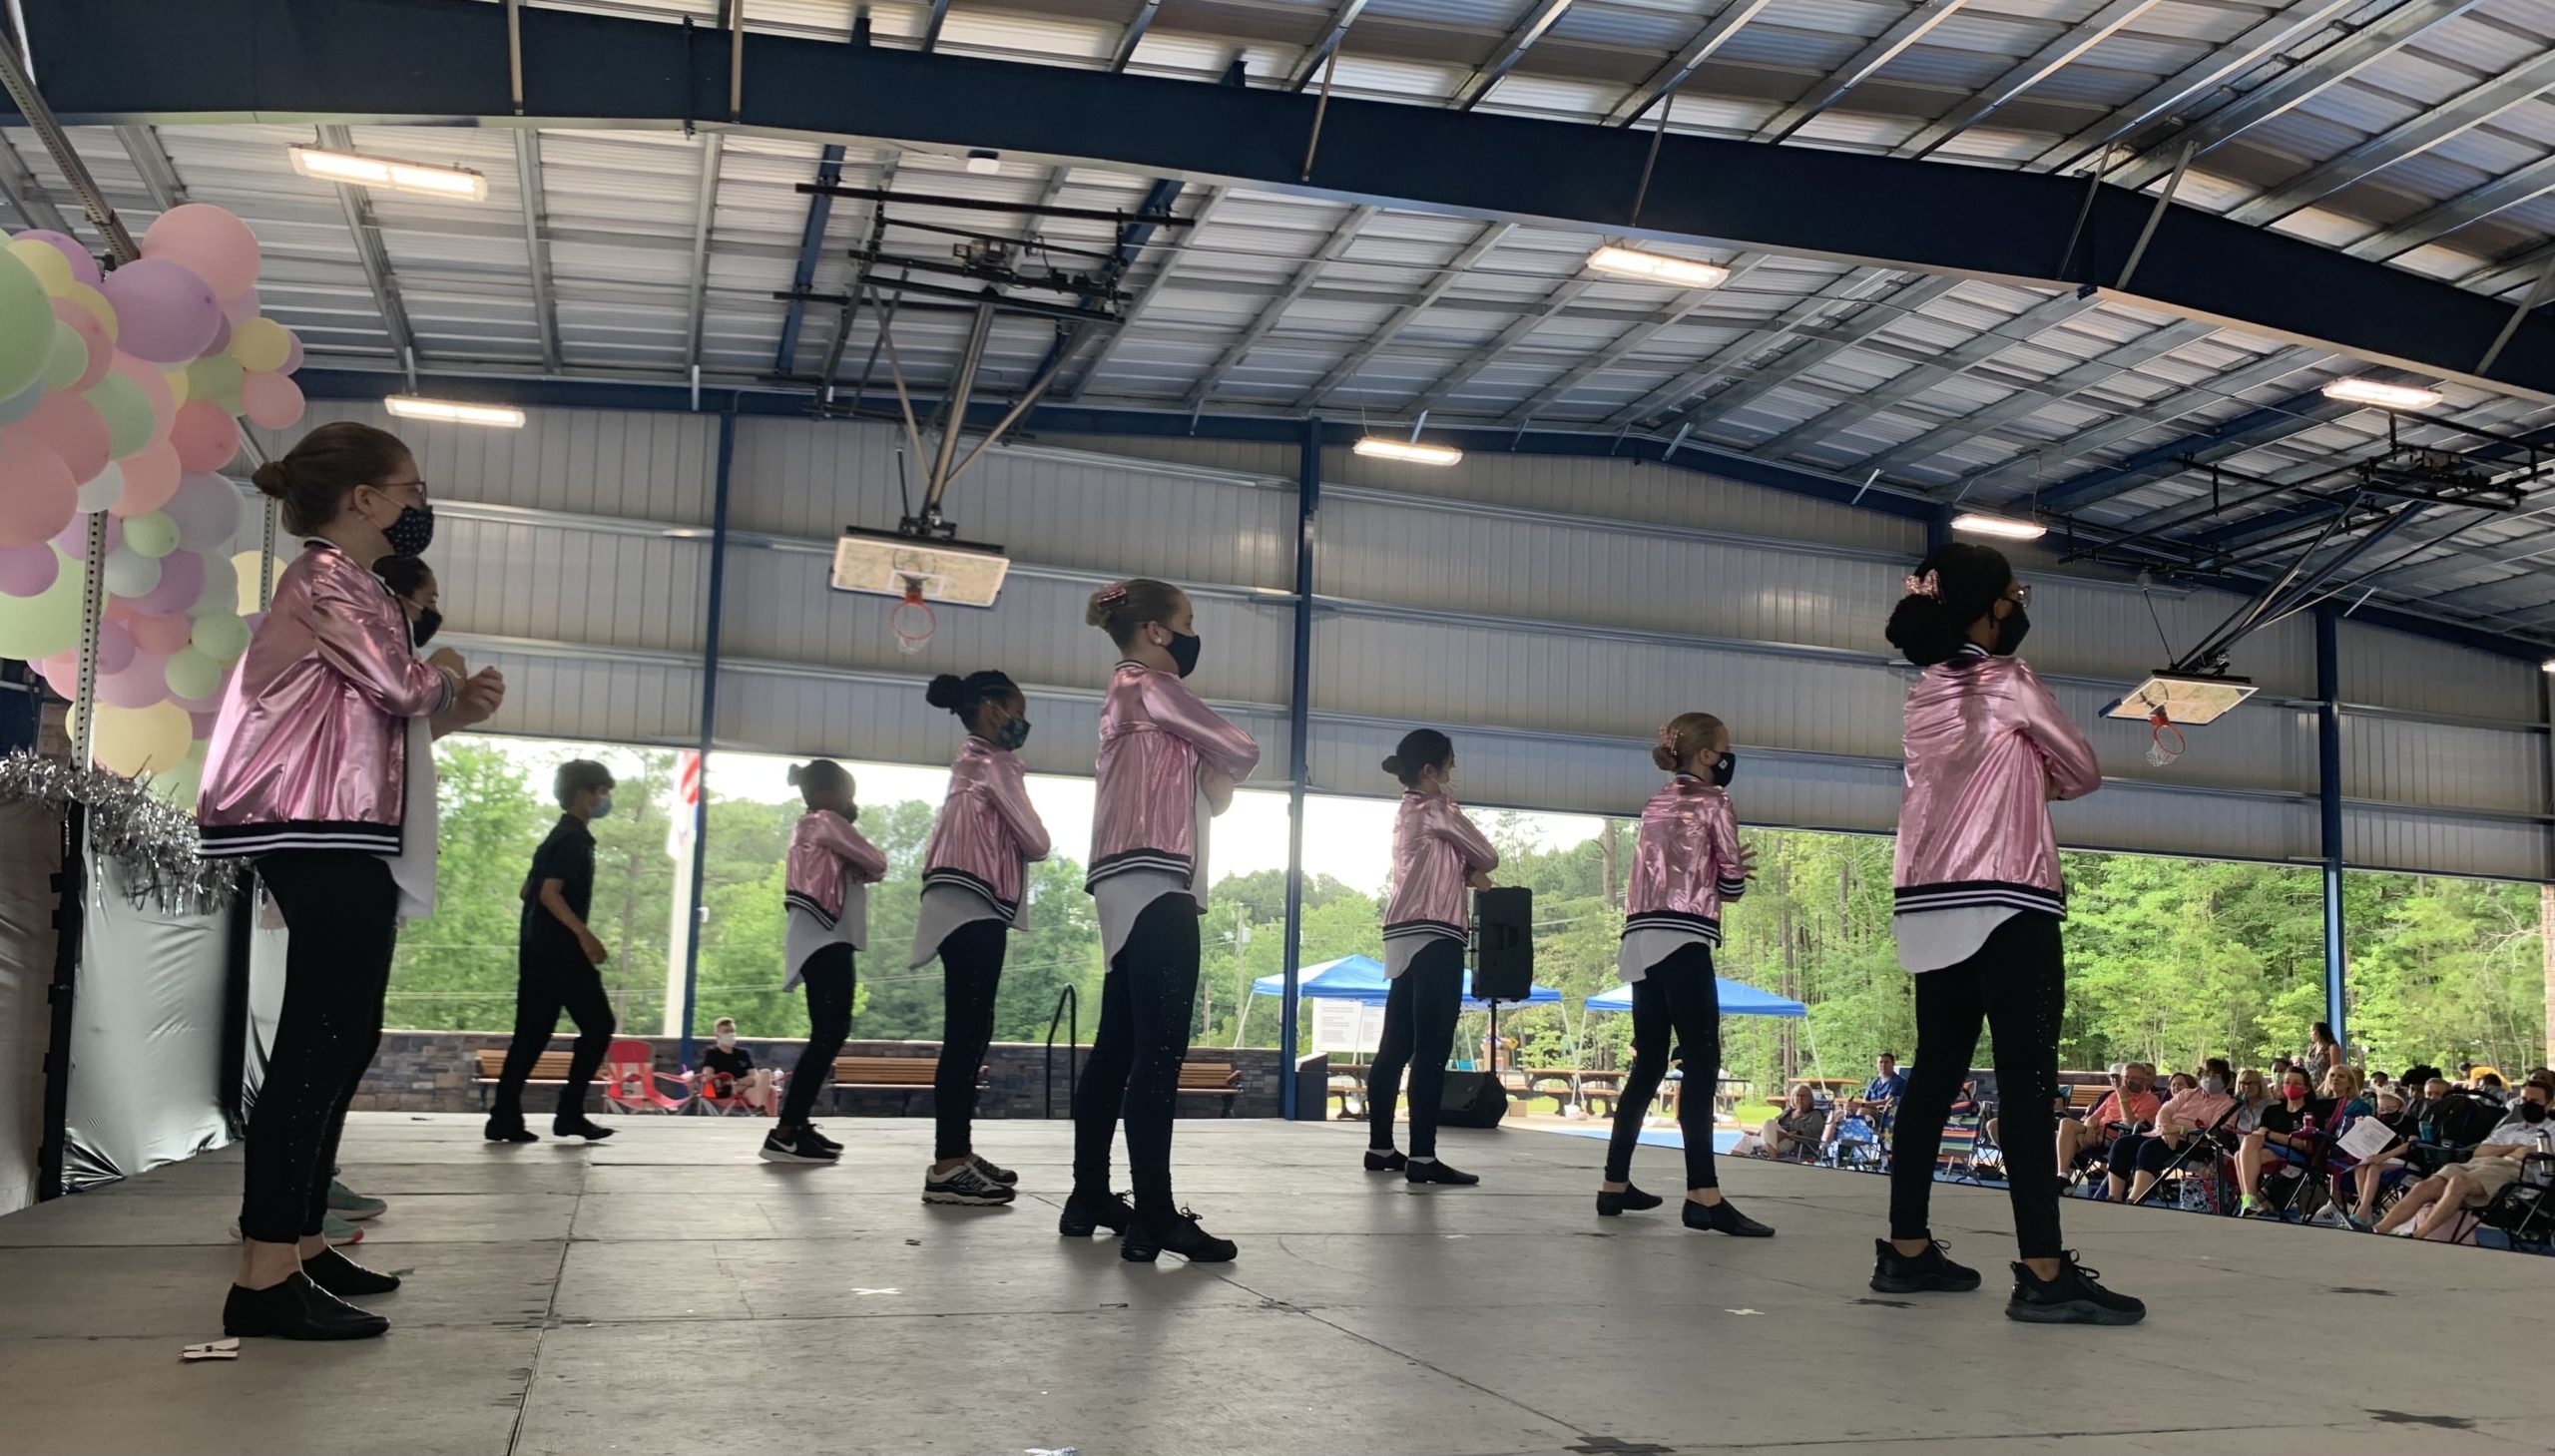 A group of young dancers perform a jazz dance on an outdoor stage, with the audience seated on camping chairs. The young women wear shiny pink jackets, the young man wears all black, and they all wear masks.